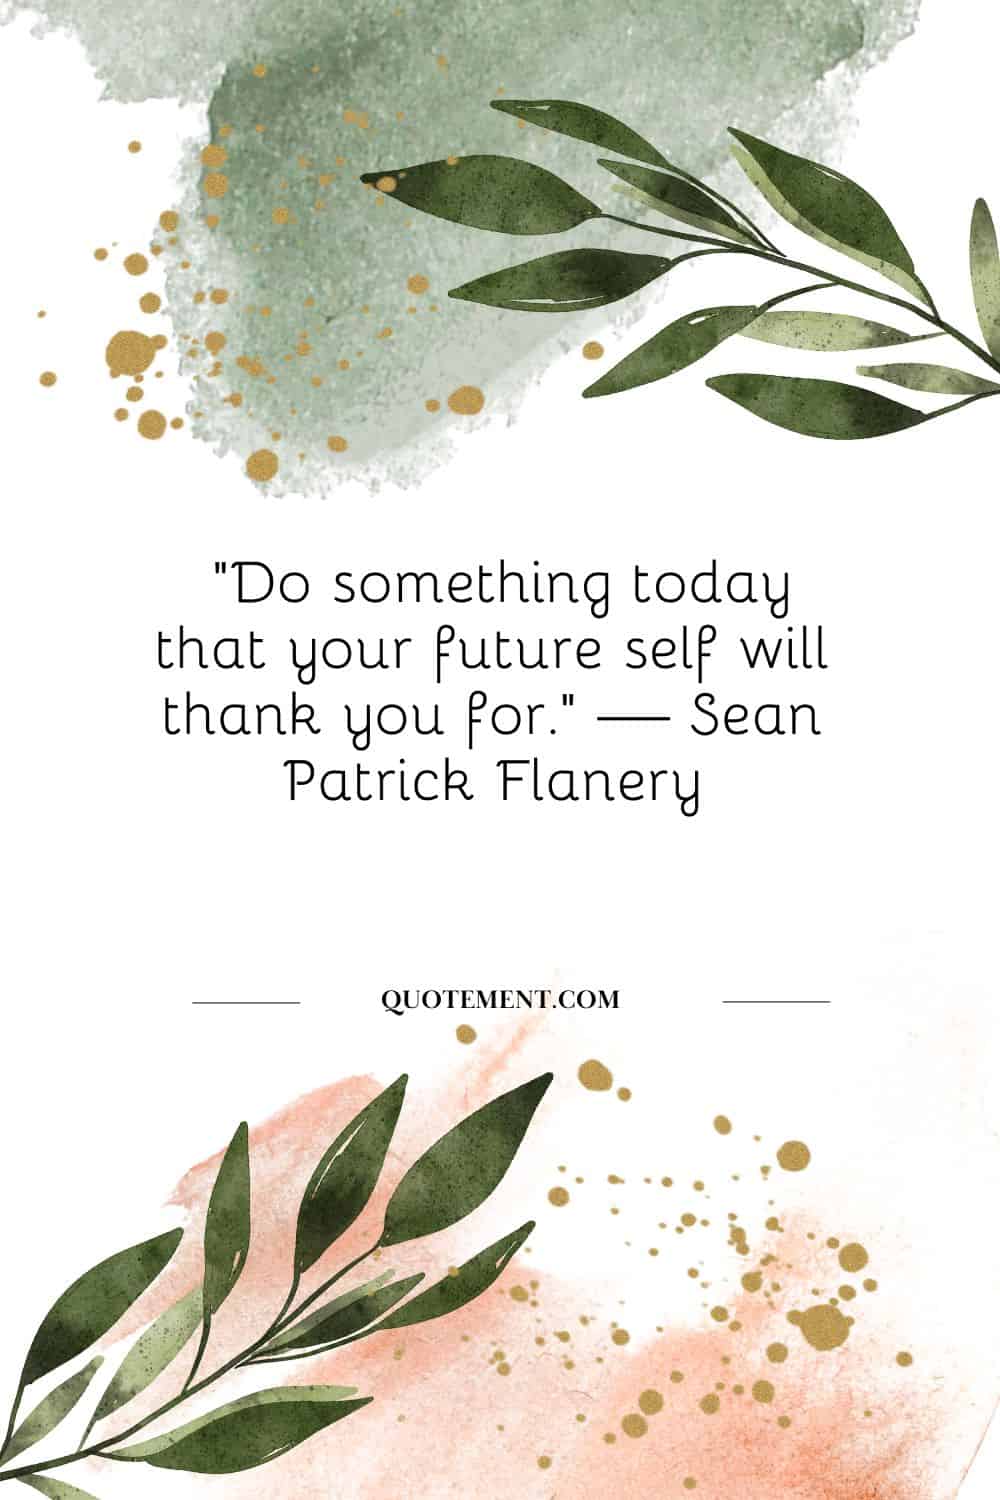 Do something today that your future self will thank you for. — Sean Patrick Flanery